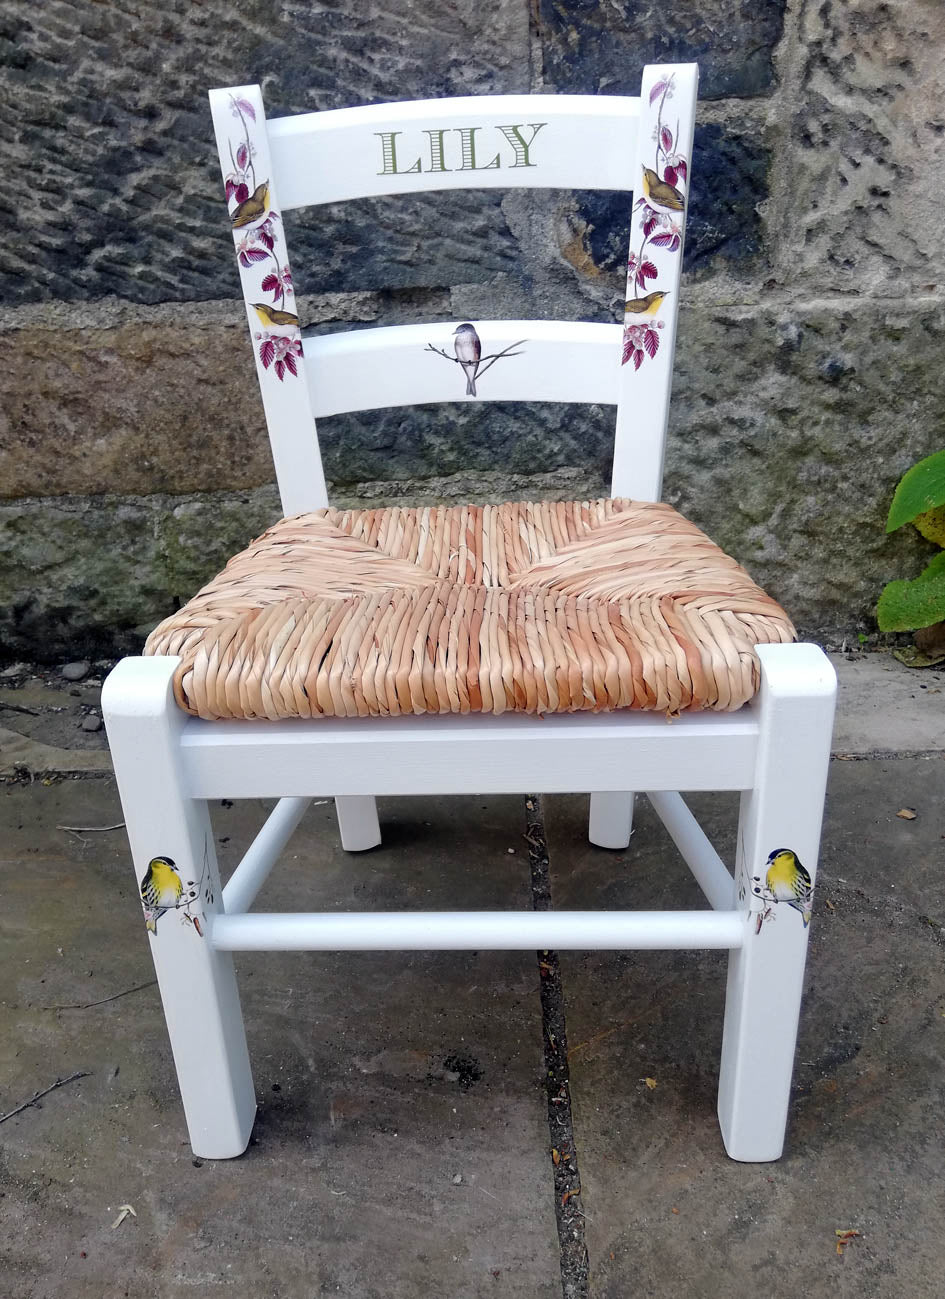 Rush seat personalised children's chair - birds on branches theme - made to order